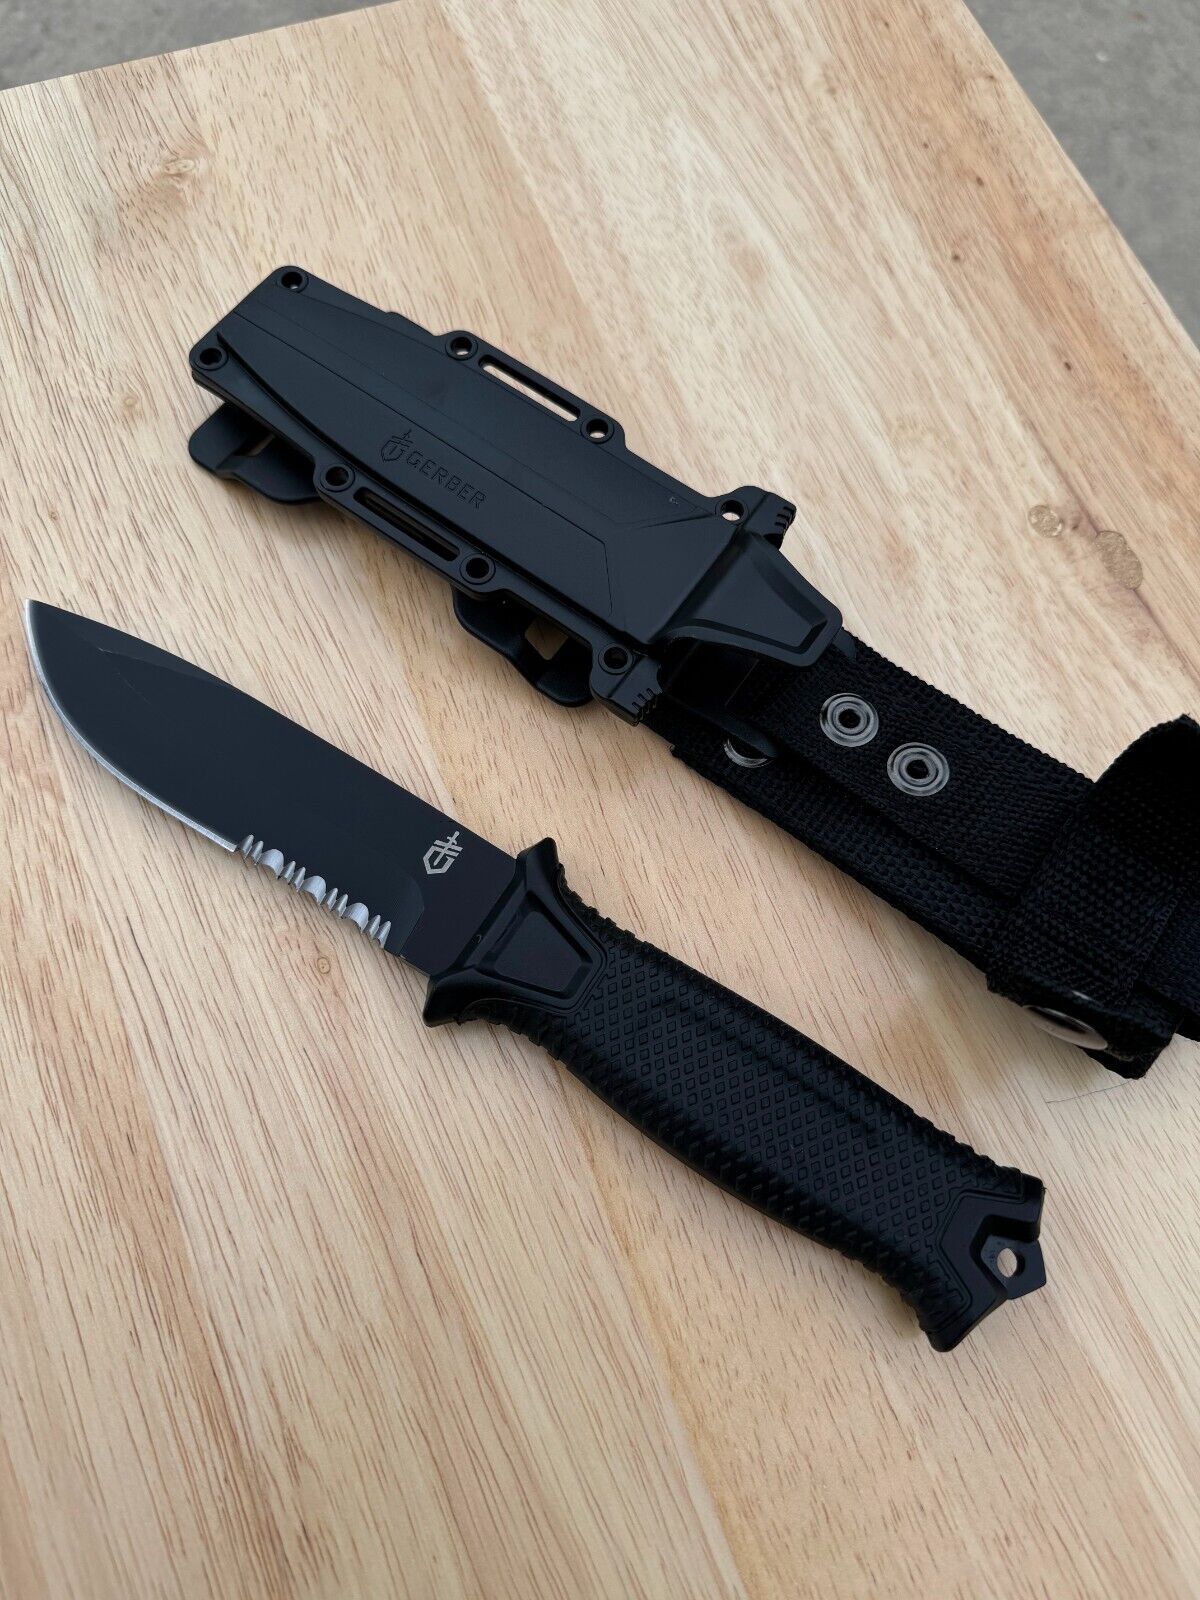 Gerber Gear Strongarm Fixed Steel Blade Serrated Tactical Fathers Day Gift Knife